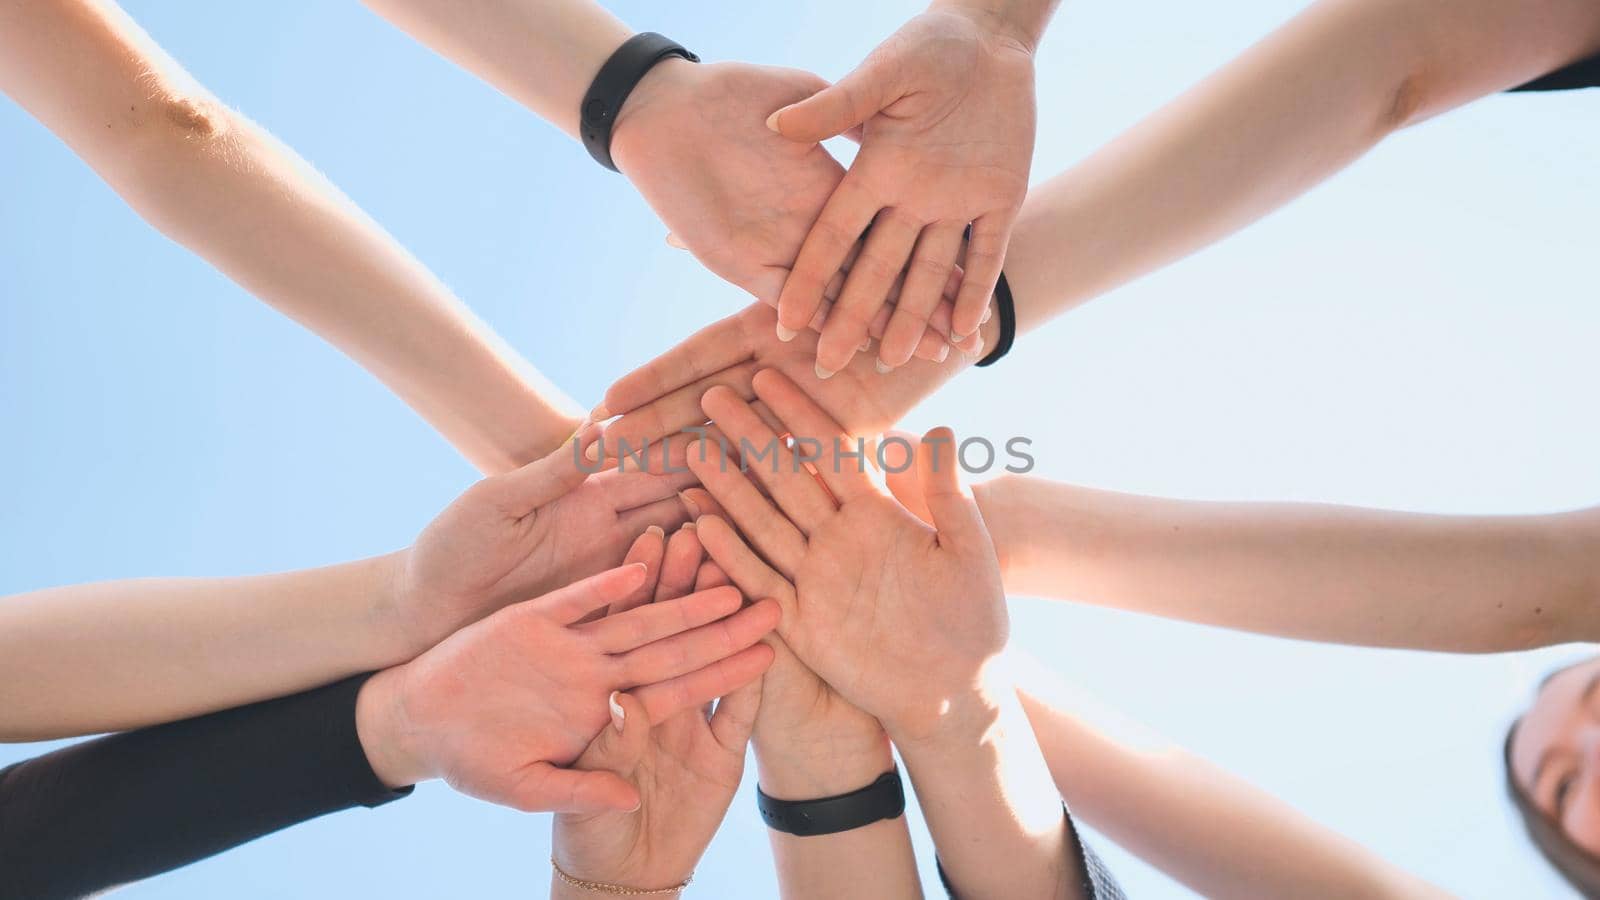 Cheerful girls join hands together as a sign of unity and joint successful work. Teamwork stacking hand concept